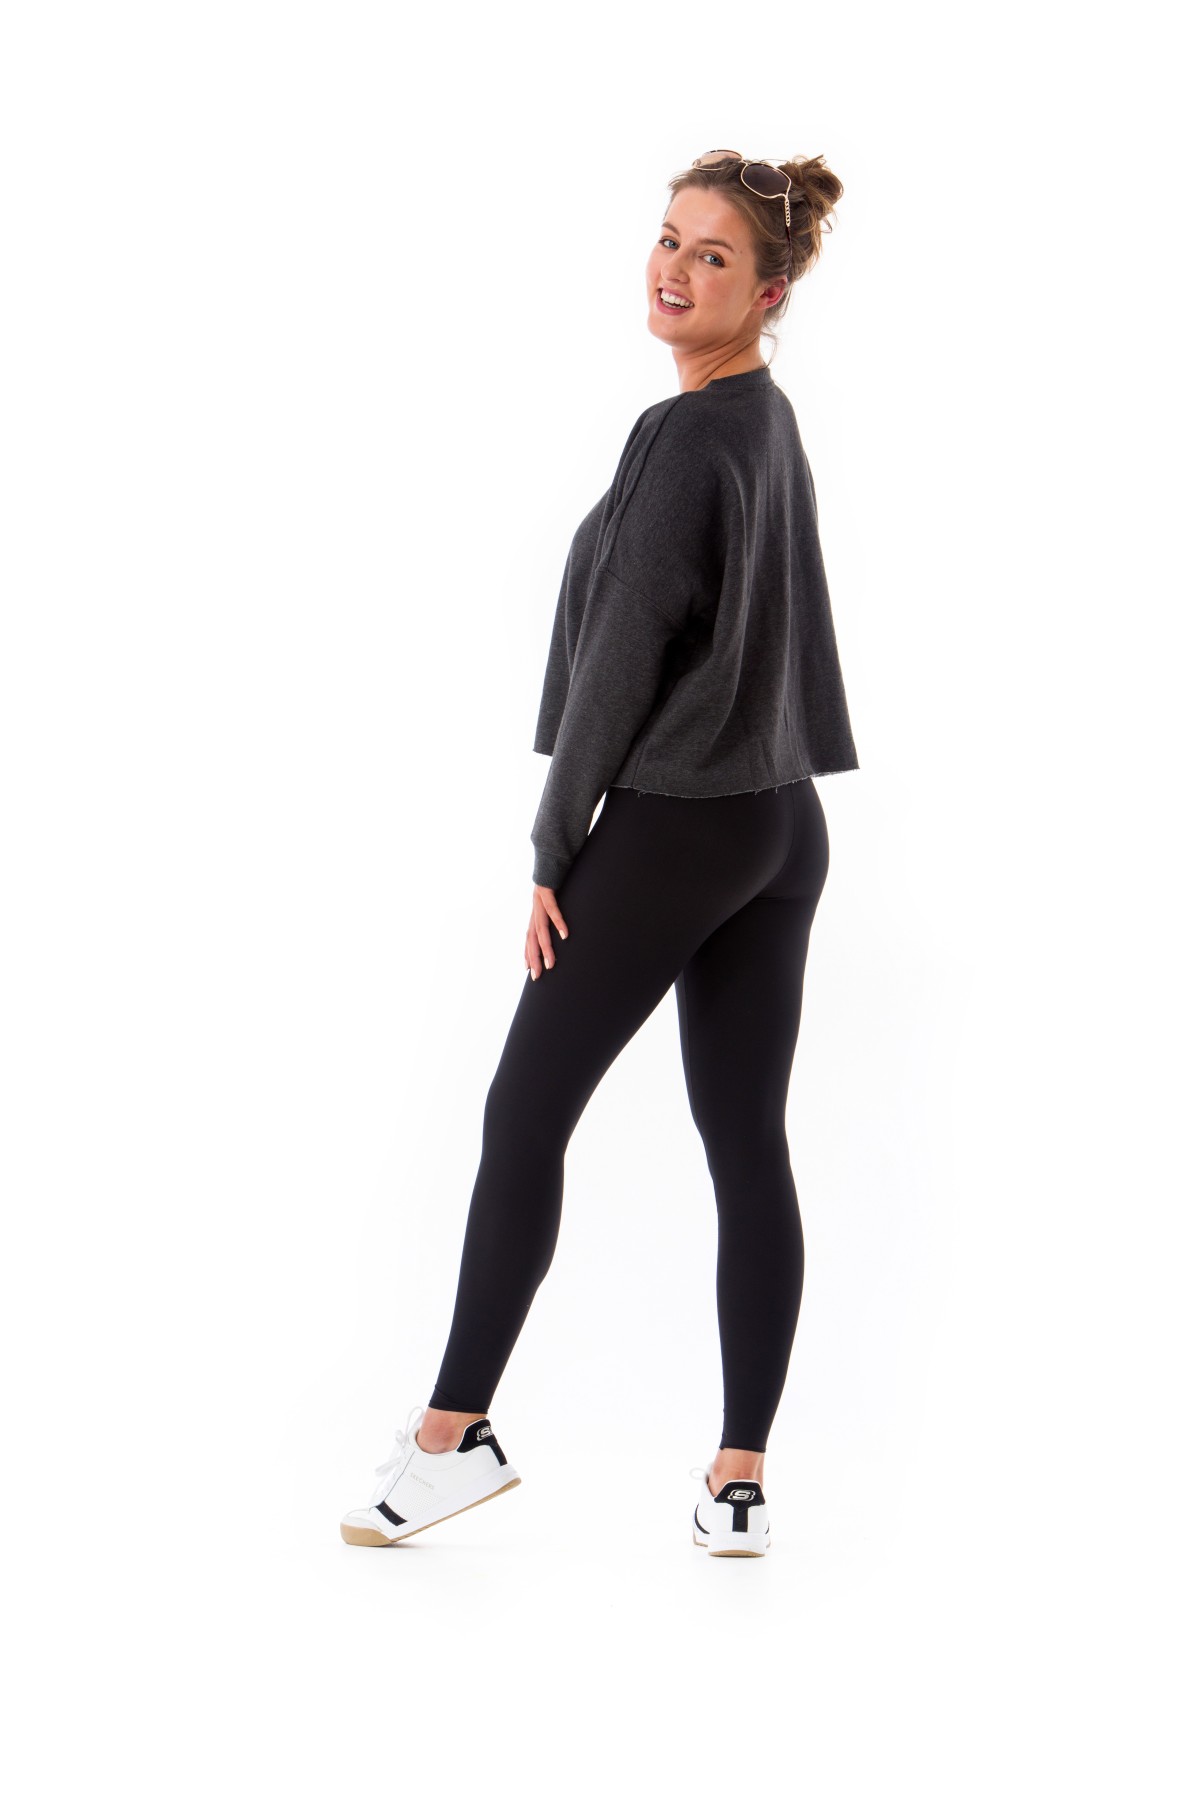 ATIR Shapewear - Very limited stock Stacey 3/4 Leggings in Chocolate or  Charcoal only €20 www.atir.ie